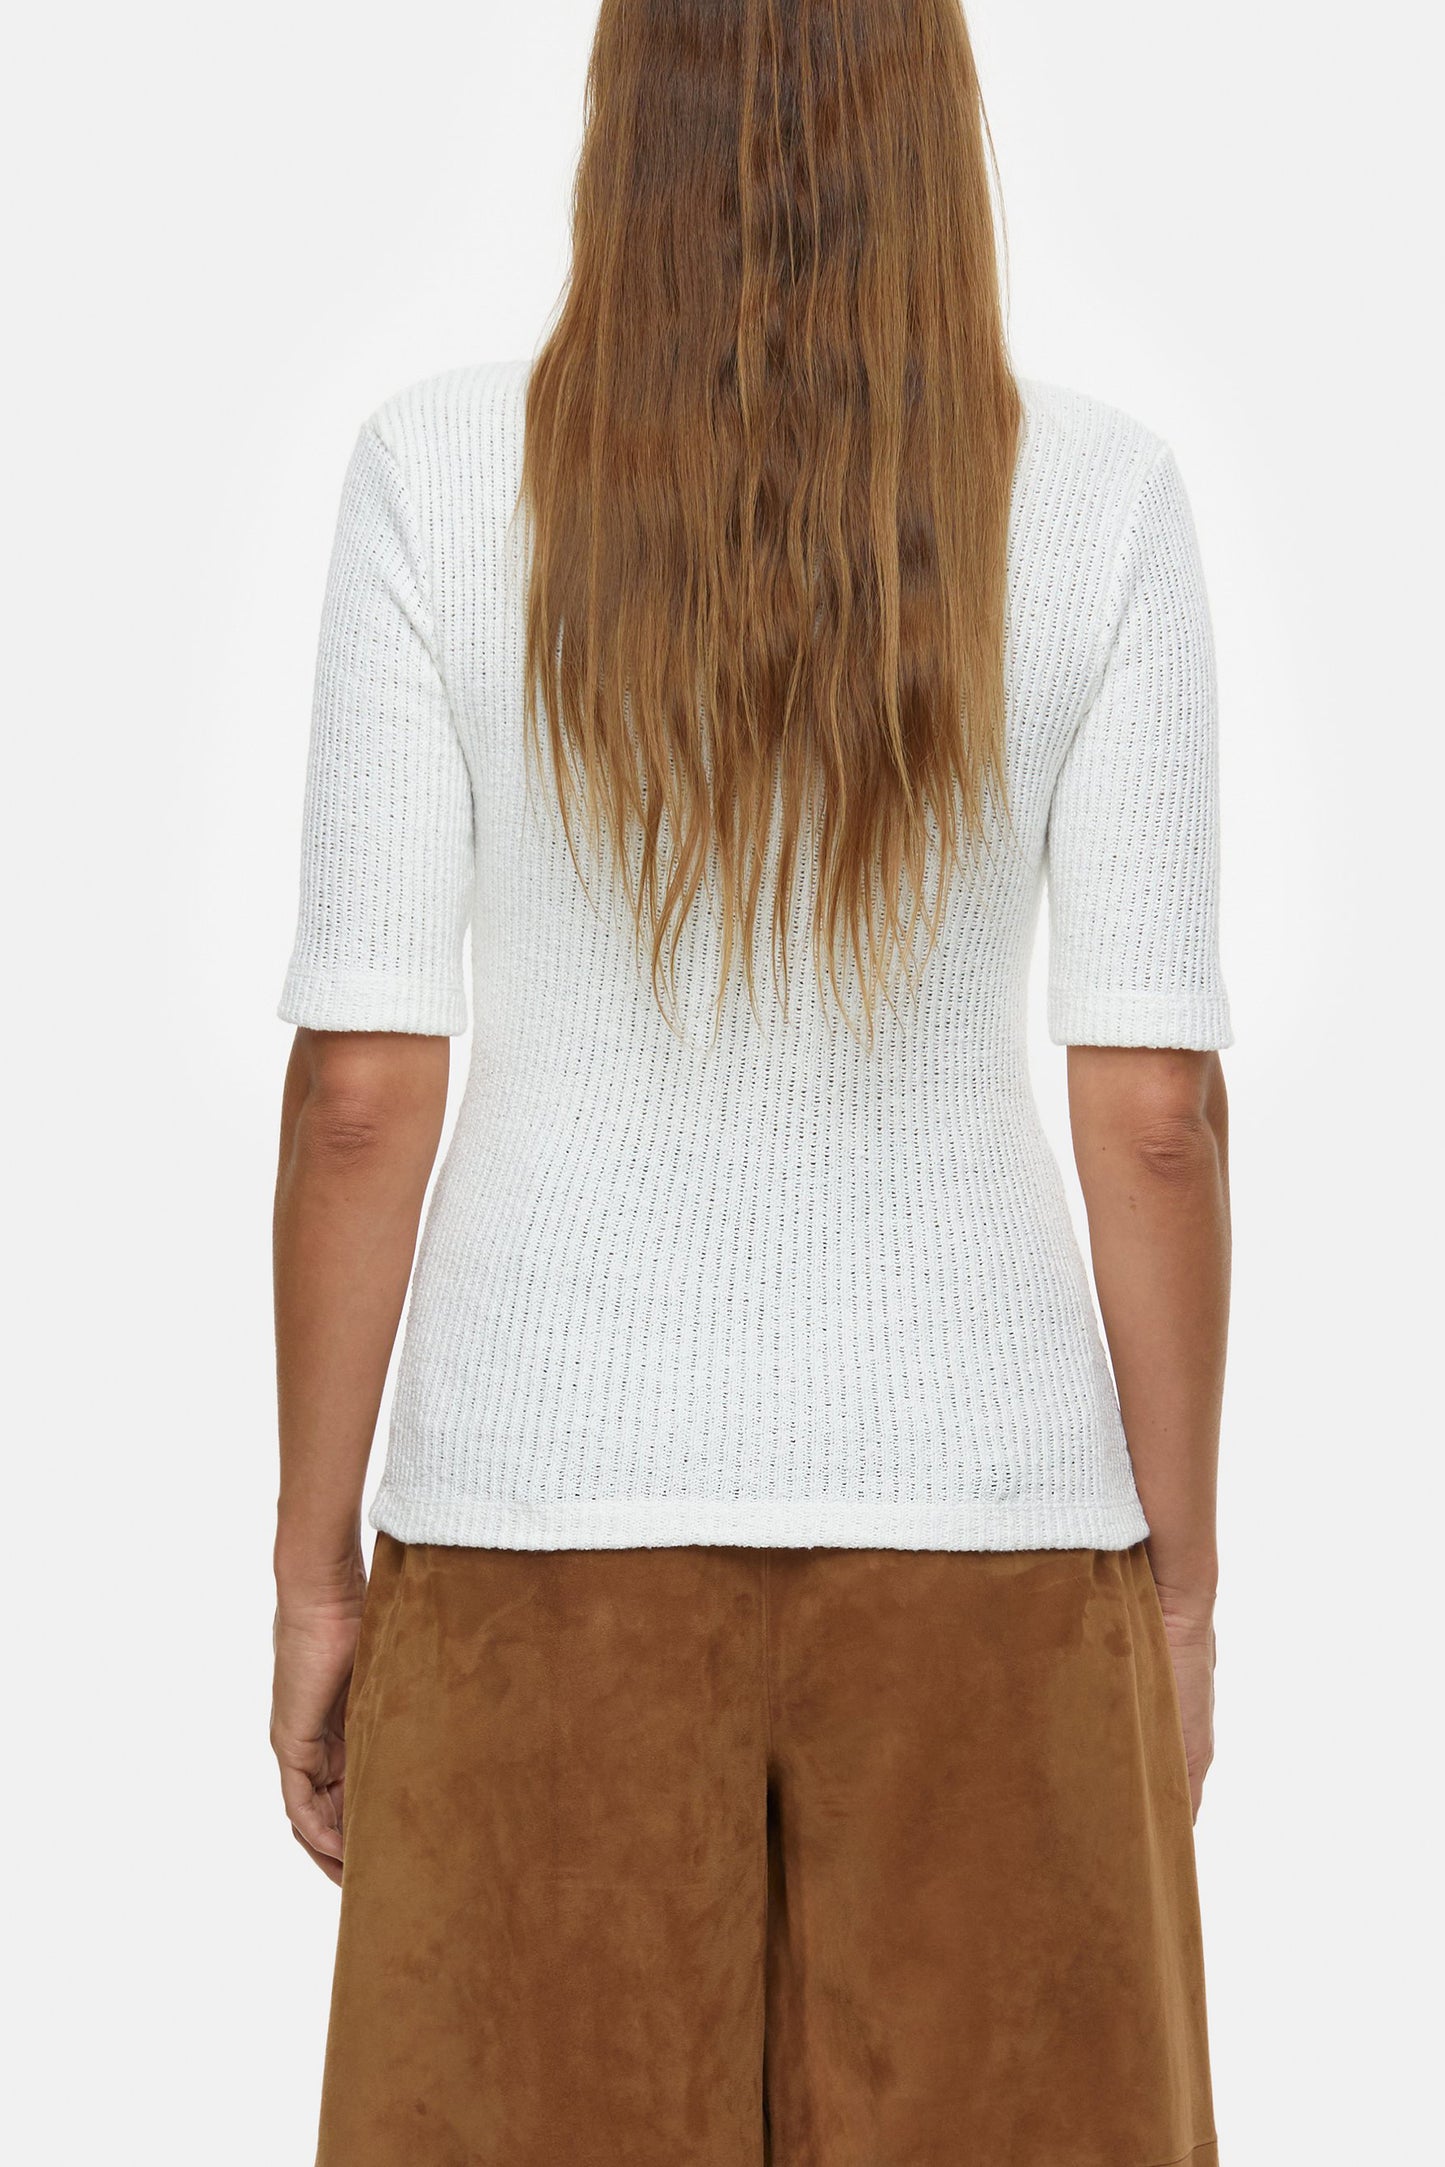 Boucle-Shirt in IvoryClosed - Anita Hass